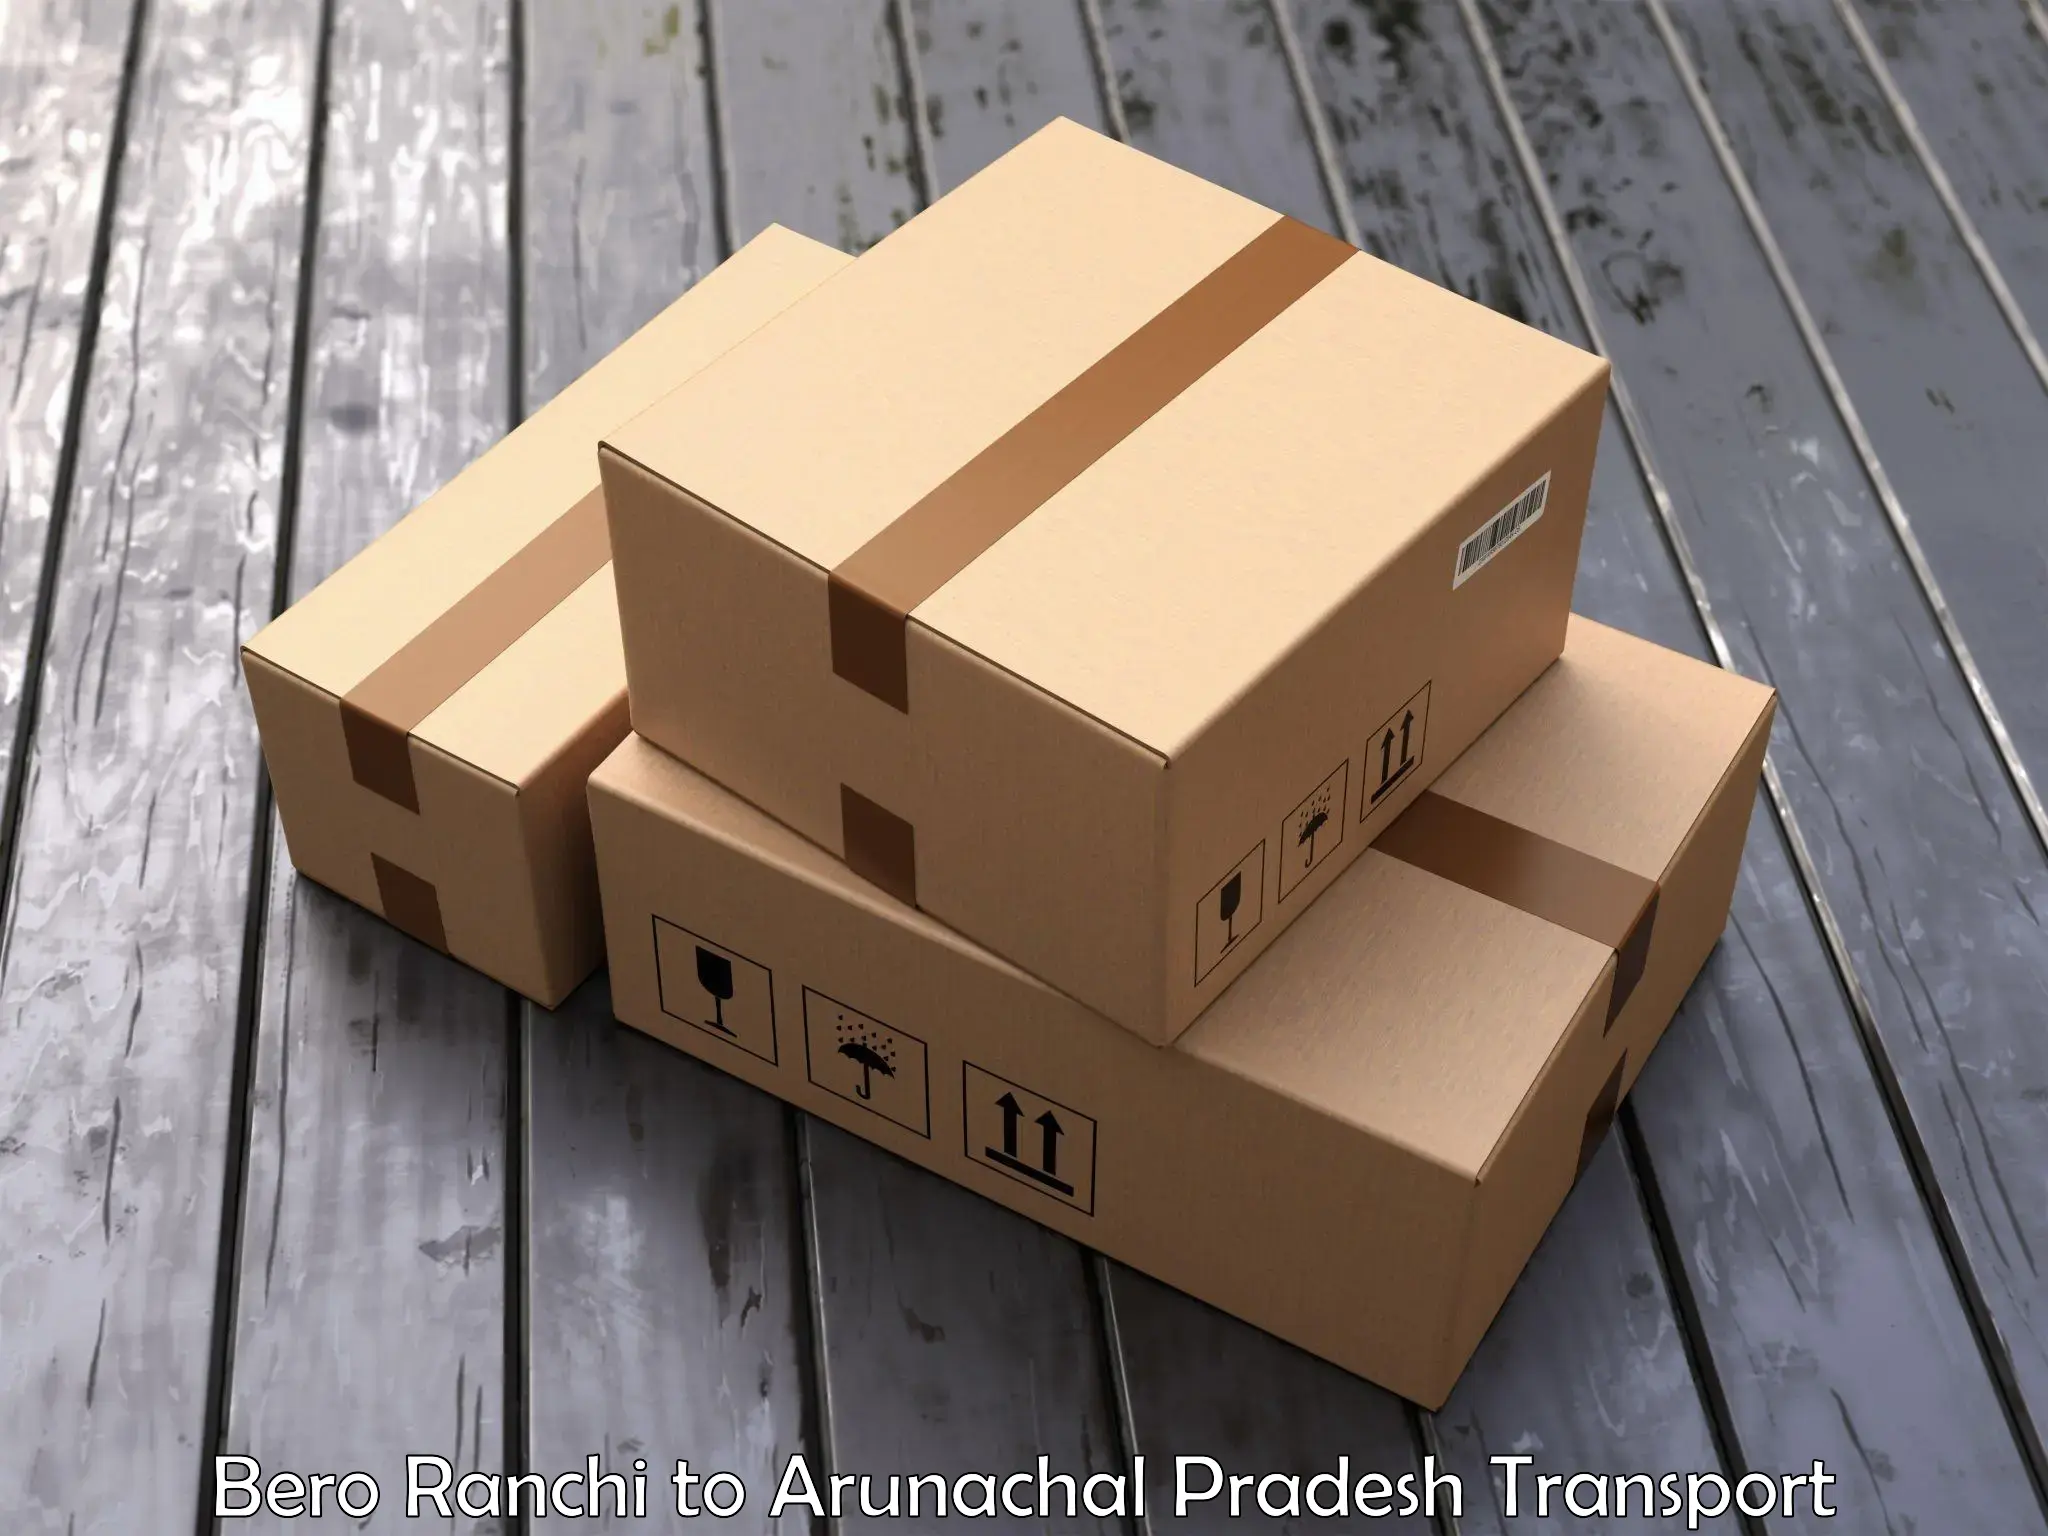 Parcel transport services Bero Ranchi to Aalo